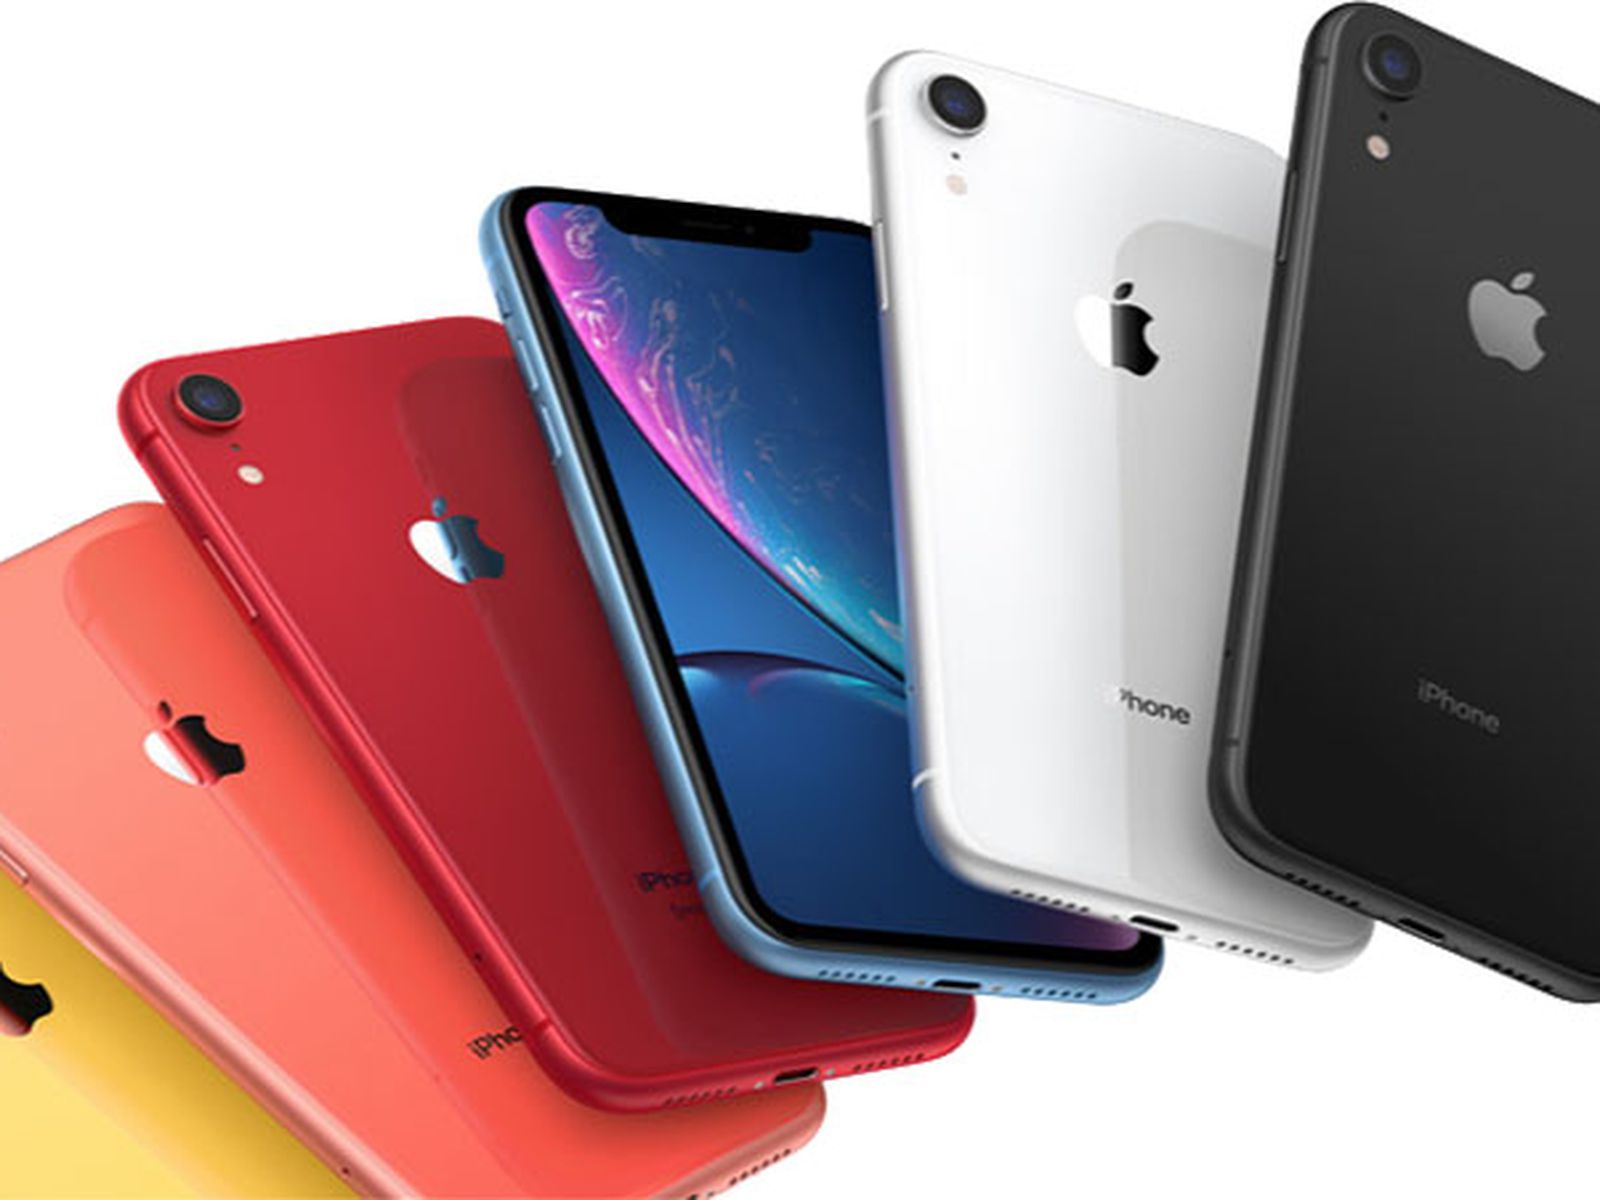 Apple S Iphone Xr Was Most Popular Smartphone In 2019 Based On Shipment Estimates Macrumors